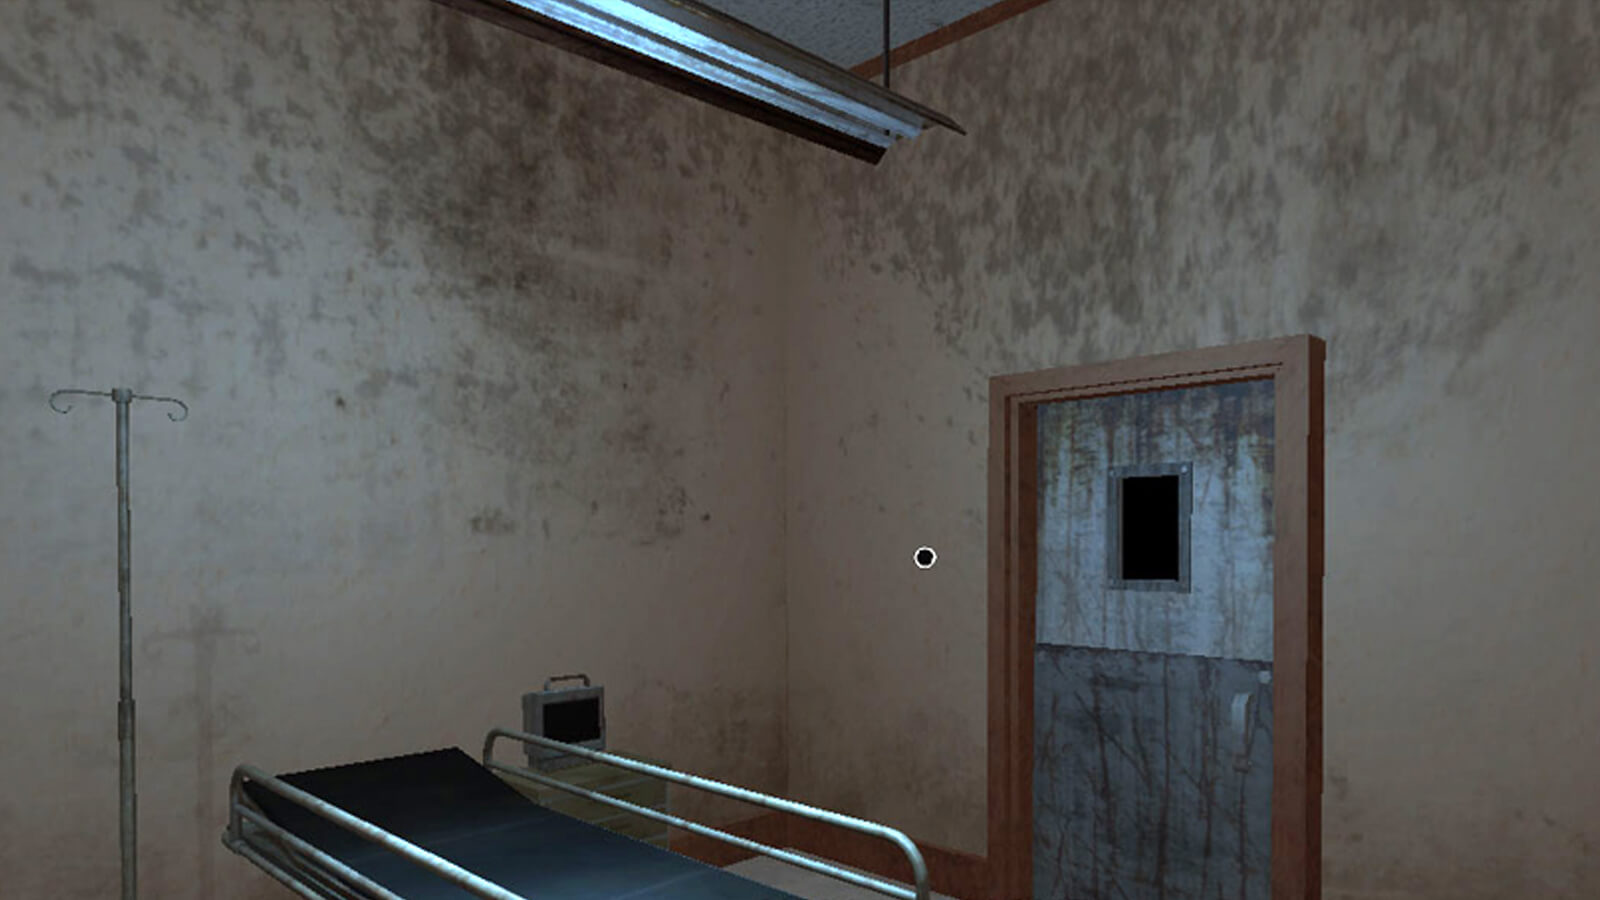 A dirty, bare hospital room with a gurney and naked lighting fixture above